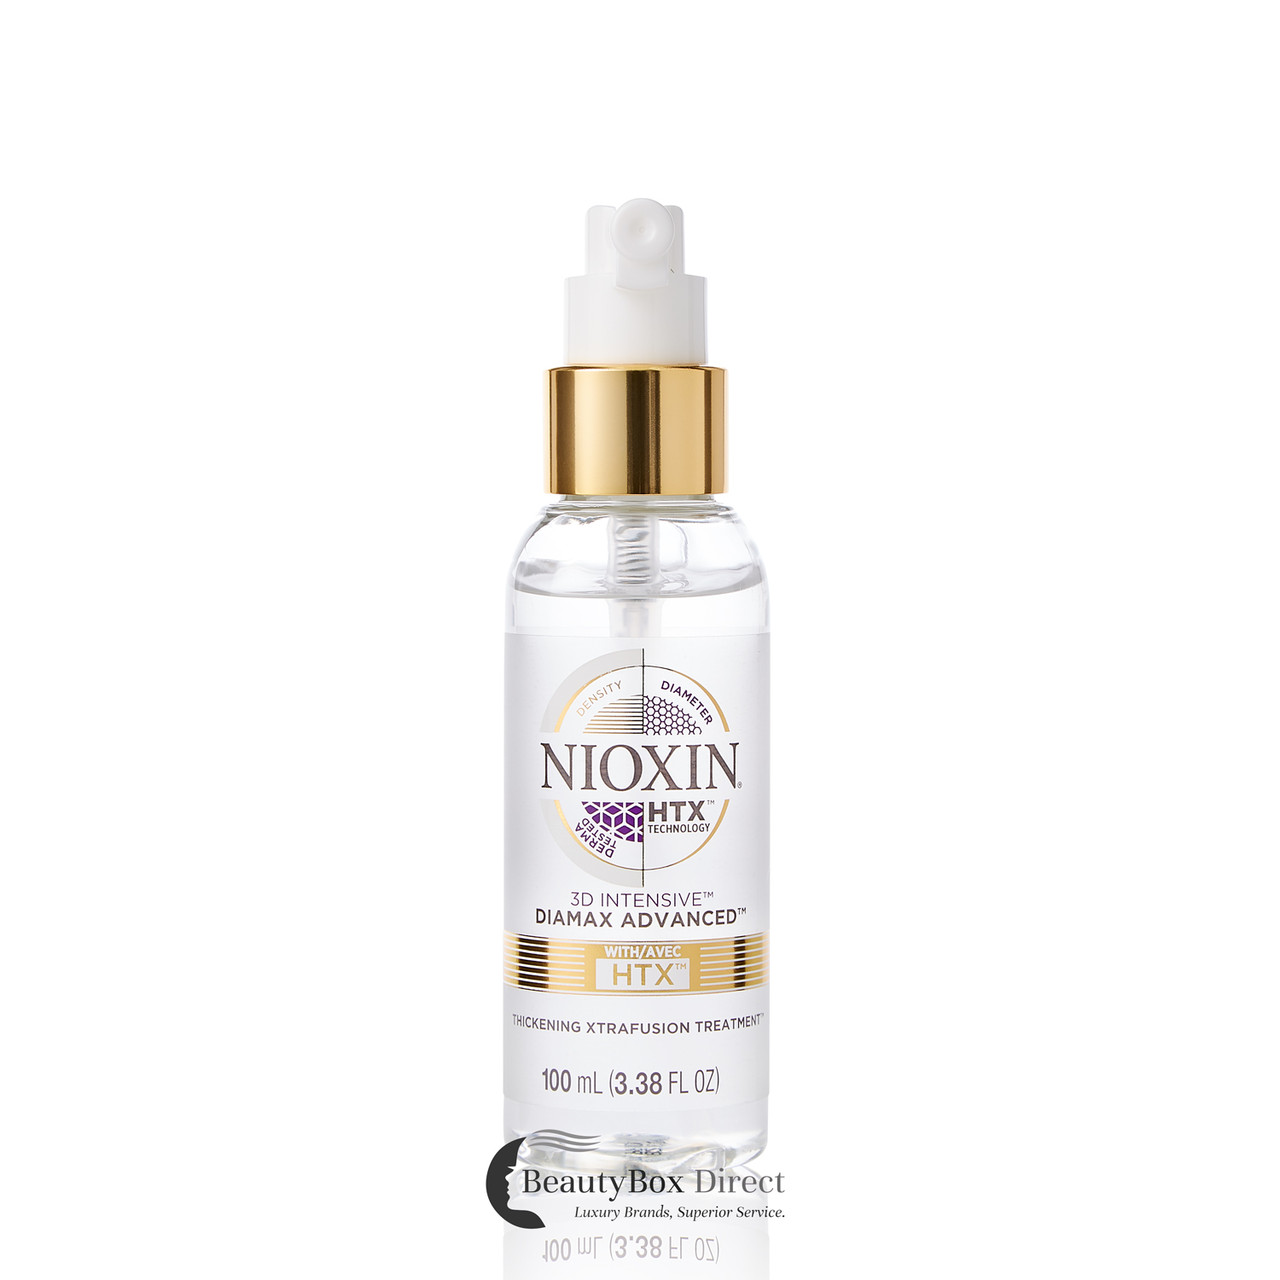 Nioxin 3D Intensive Therapy Diamax Advanced Thickening Xtrafusion Treatment  3.38 oz - BeautyBox Direct